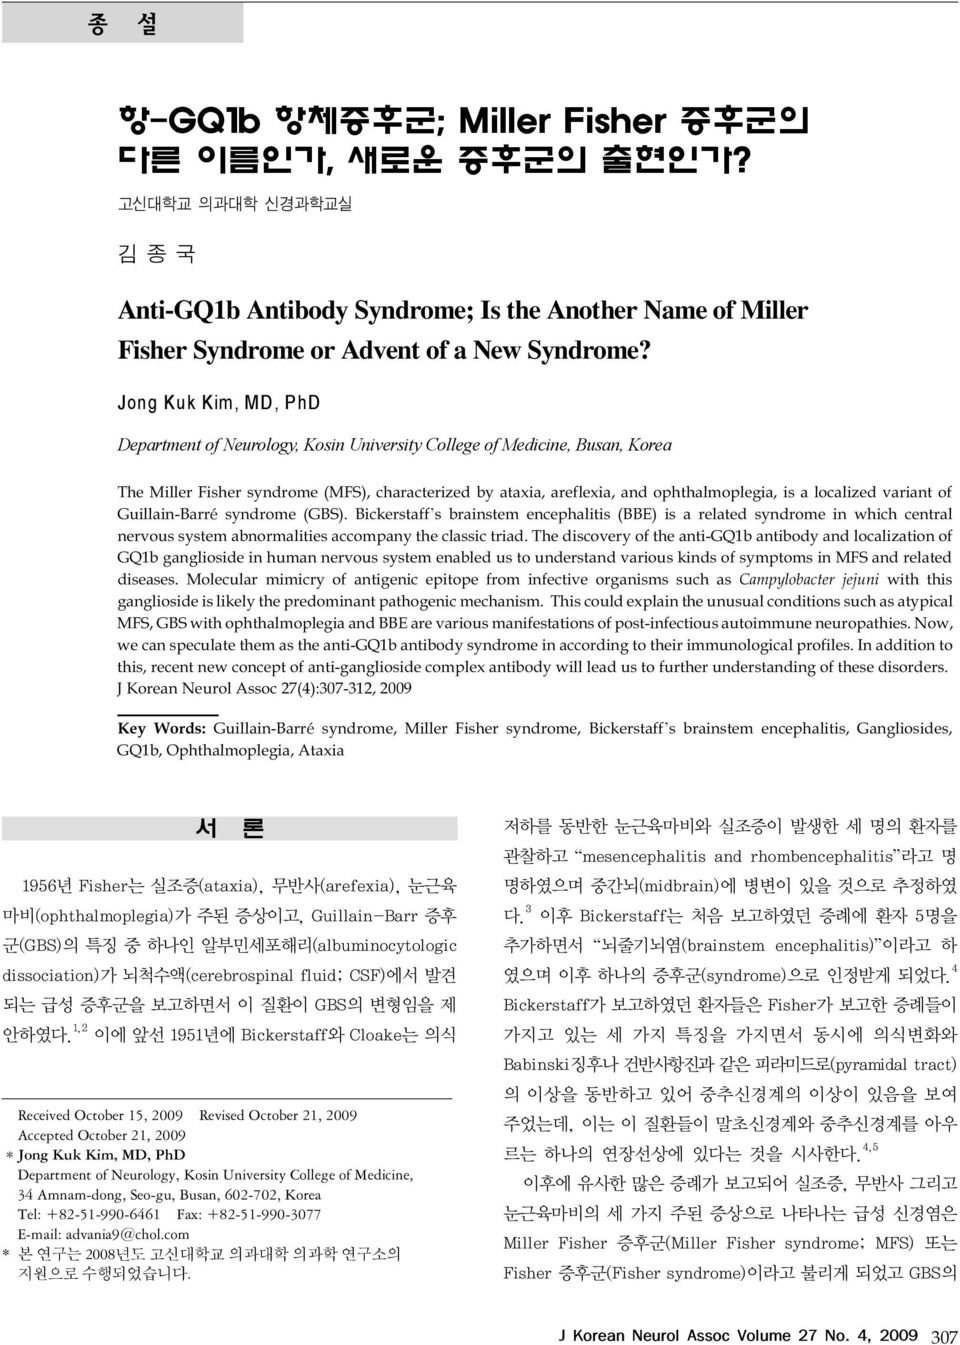 Jong Kuk Kim, MD, PhD Department of Neurology, Kosin University College of Medicine, Busan, Korea The Miller Fisher syndrome (MFS), characterized by ataxia, areflexia, and ophthalmoplegia, is a